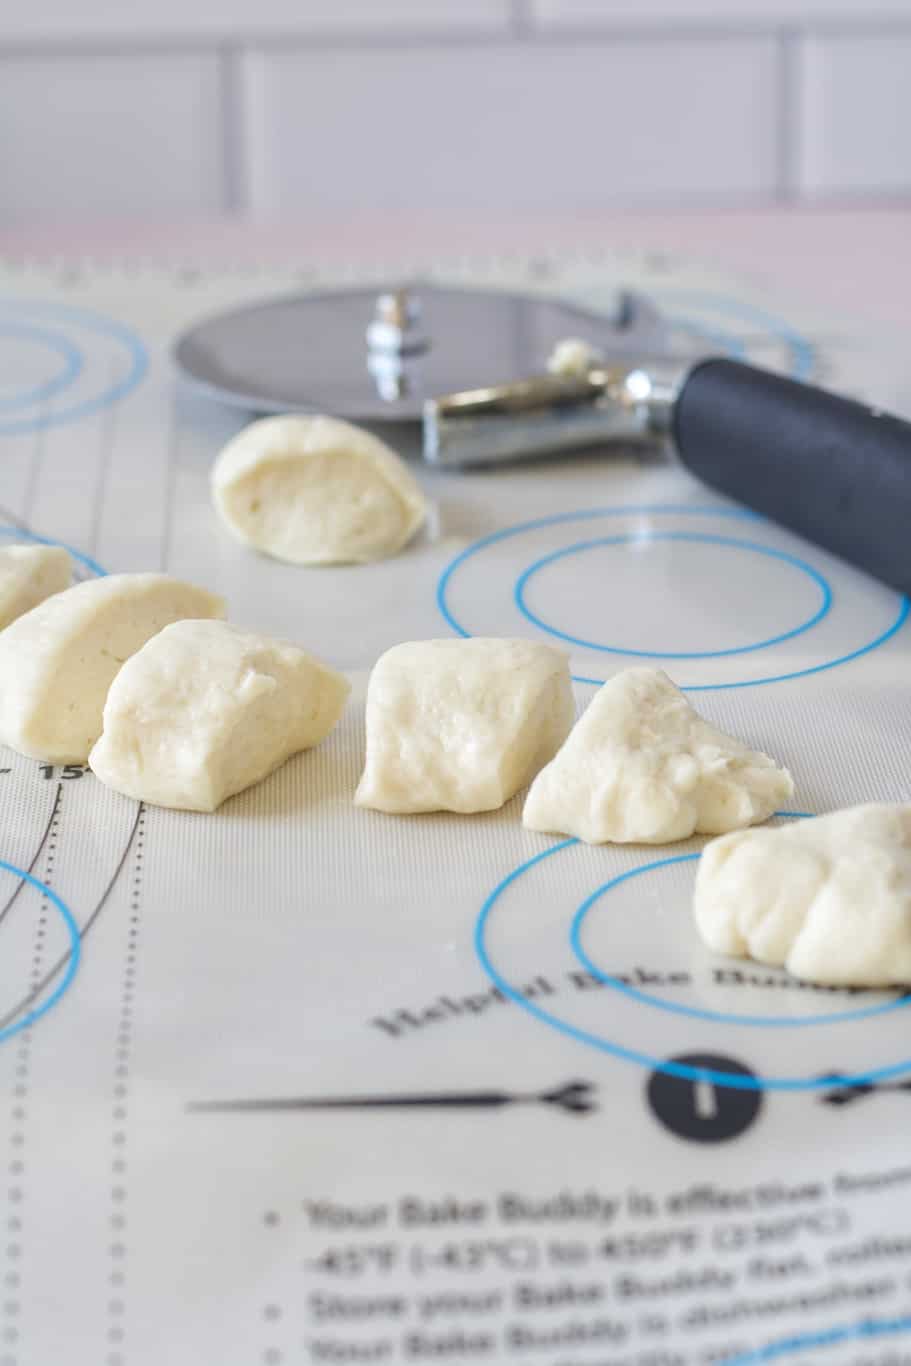 store bought pizza crust cut into bite-size pieces